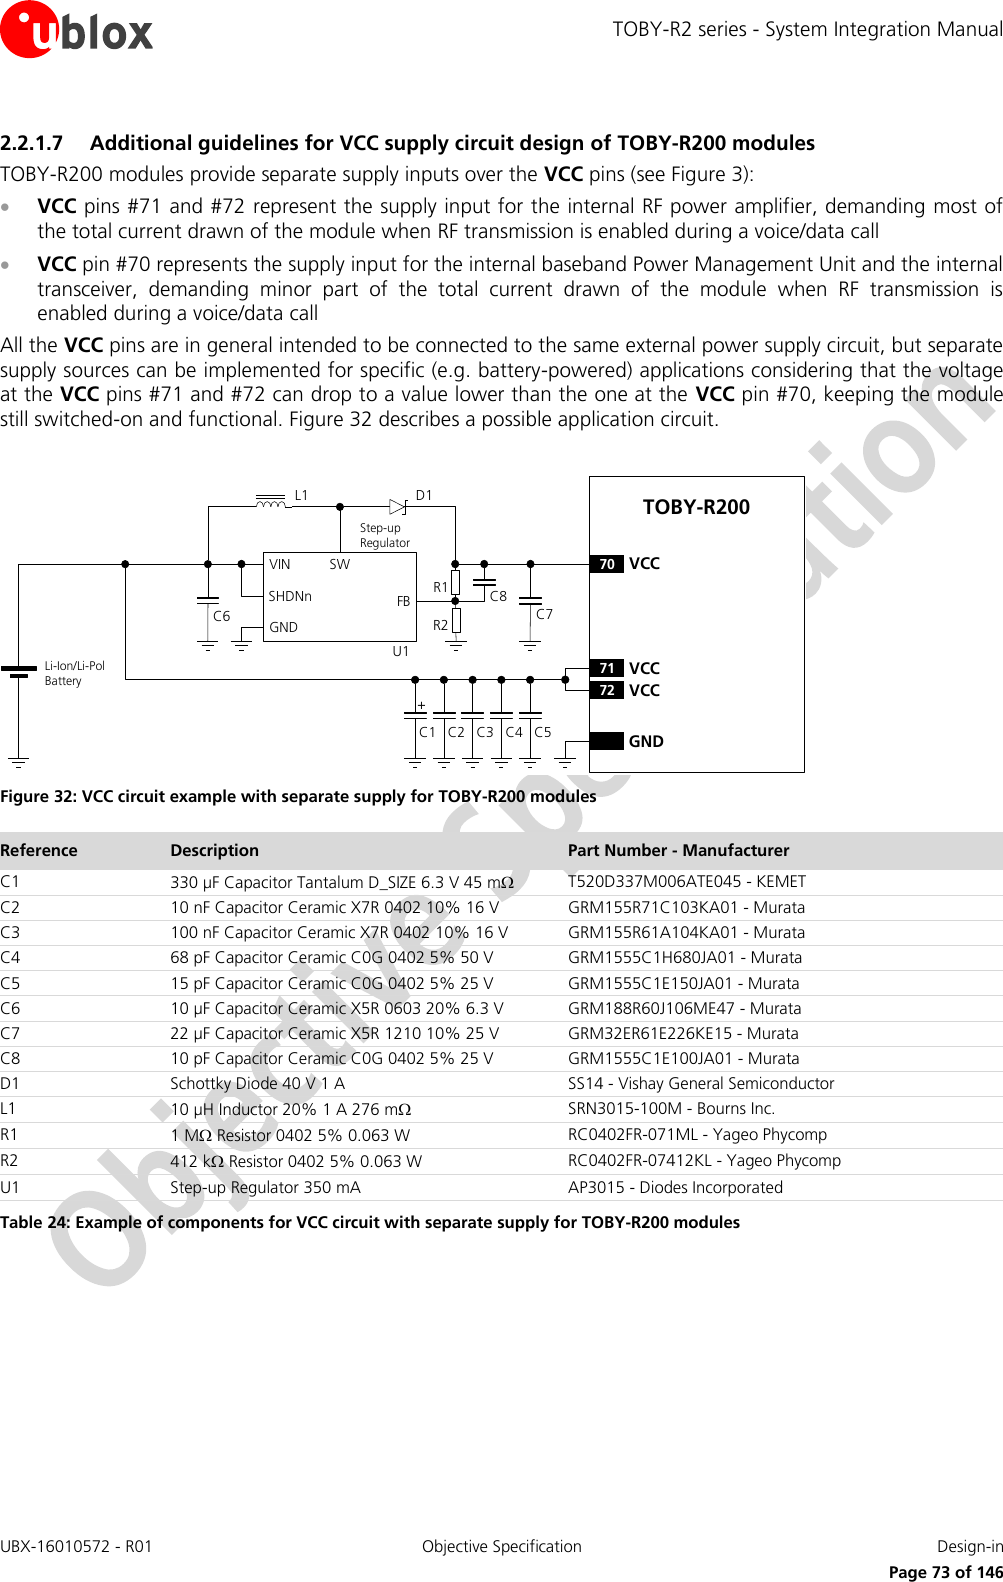 TOBY-R2 series - System Integration Manual UBX-16010572 - R01  Objective Specification  Design-in     Page 73 of 146 2.2.1.7 Additional guidelines for VCC supply circuit design of TOBY-R200 modules TOBY-R200 modules provide separate supply inputs over the VCC pins (see Figure 3):  VCC pins #71 and #72 represent the supply input for the internal RF power amplifier, demanding most of the total current drawn of the module when RF transmission is enabled during a voice/data call  VCC pin #70 represents the supply input for the internal baseband Power Management Unit and the internal transceiver,  demanding  minor  part  of  the  total  current  drawn  of  the  module  when  RF  transmission  is enabled during a voice/data call All the VCC pins are in general intended to be connected to the same external power supply circuit, but separate supply sources can be implemented for specific (e.g. battery-powered) applications considering that the voltage at the VCC pins #71 and #72 can drop to a value lower than the one at the VCC pin #70, keeping the module still switched-on and functional. Figure 32 describes a possible application circuit.  C1 C4 GNDC3C2 C5TOBY-R20071 VCC72 VCC70 VCC+Li-Ion/Li-Pol BatteryC6SWVINSHDNnGNDFB C7R1R2L1U1Step-up RegulatorD1C8 Figure 32: VCC circuit example with separate supply for TOBY-R200 modules  Reference Description Part Number - Manufacturer C1 330 µF Capacitor Tantalum D_SIZE 6.3 V 45 m T520D337M006ATE045 - KEMET C2 10 nF Capacitor Ceramic X7R 0402 10% 16 V GRM155R71C103KA01 - Murata C3 100 nF Capacitor Ceramic X7R 0402 10% 16 V GRM155R61A104KA01 - Murata C4 68 pF Capacitor Ceramic C0G 0402 5% 50 V GRM1555C1H680JA01 - Murata C5 15 pF Capacitor Ceramic C0G 0402 5% 25 V  GRM1555C1E150JA01 - Murata C6 10 µF Capacitor Ceramic X5R 0603 20% 6.3 V GRM188R60J106ME47 - Murata C7 22 µF Capacitor Ceramic X5R 1210 10% 25 V GRM32ER61E226KE15 - Murata C8 10 pF Capacitor Ceramic C0G 0402 5% 25 V  GRM1555C1E100JA01 - Murata D1 Schottky Diode 40 V 1 A SS14 - Vishay General Semiconductor L1 10 µH Inductor 20% 1 A 276 m SRN3015-100M - Bourns Inc. R1 1 M Resistor 0402 5% 0.063 W RC0402FR-071ML - Yageo Phycomp R2 412 k Resistor 0402 5% 0.063 W RC0402FR-07412KL - Yageo Phycomp U1 Step-up Regulator 350 mA AP3015 - Diodes Incorporated Table 24: Example of components for VCC circuit with separate supply for TOBY-R200 modules   